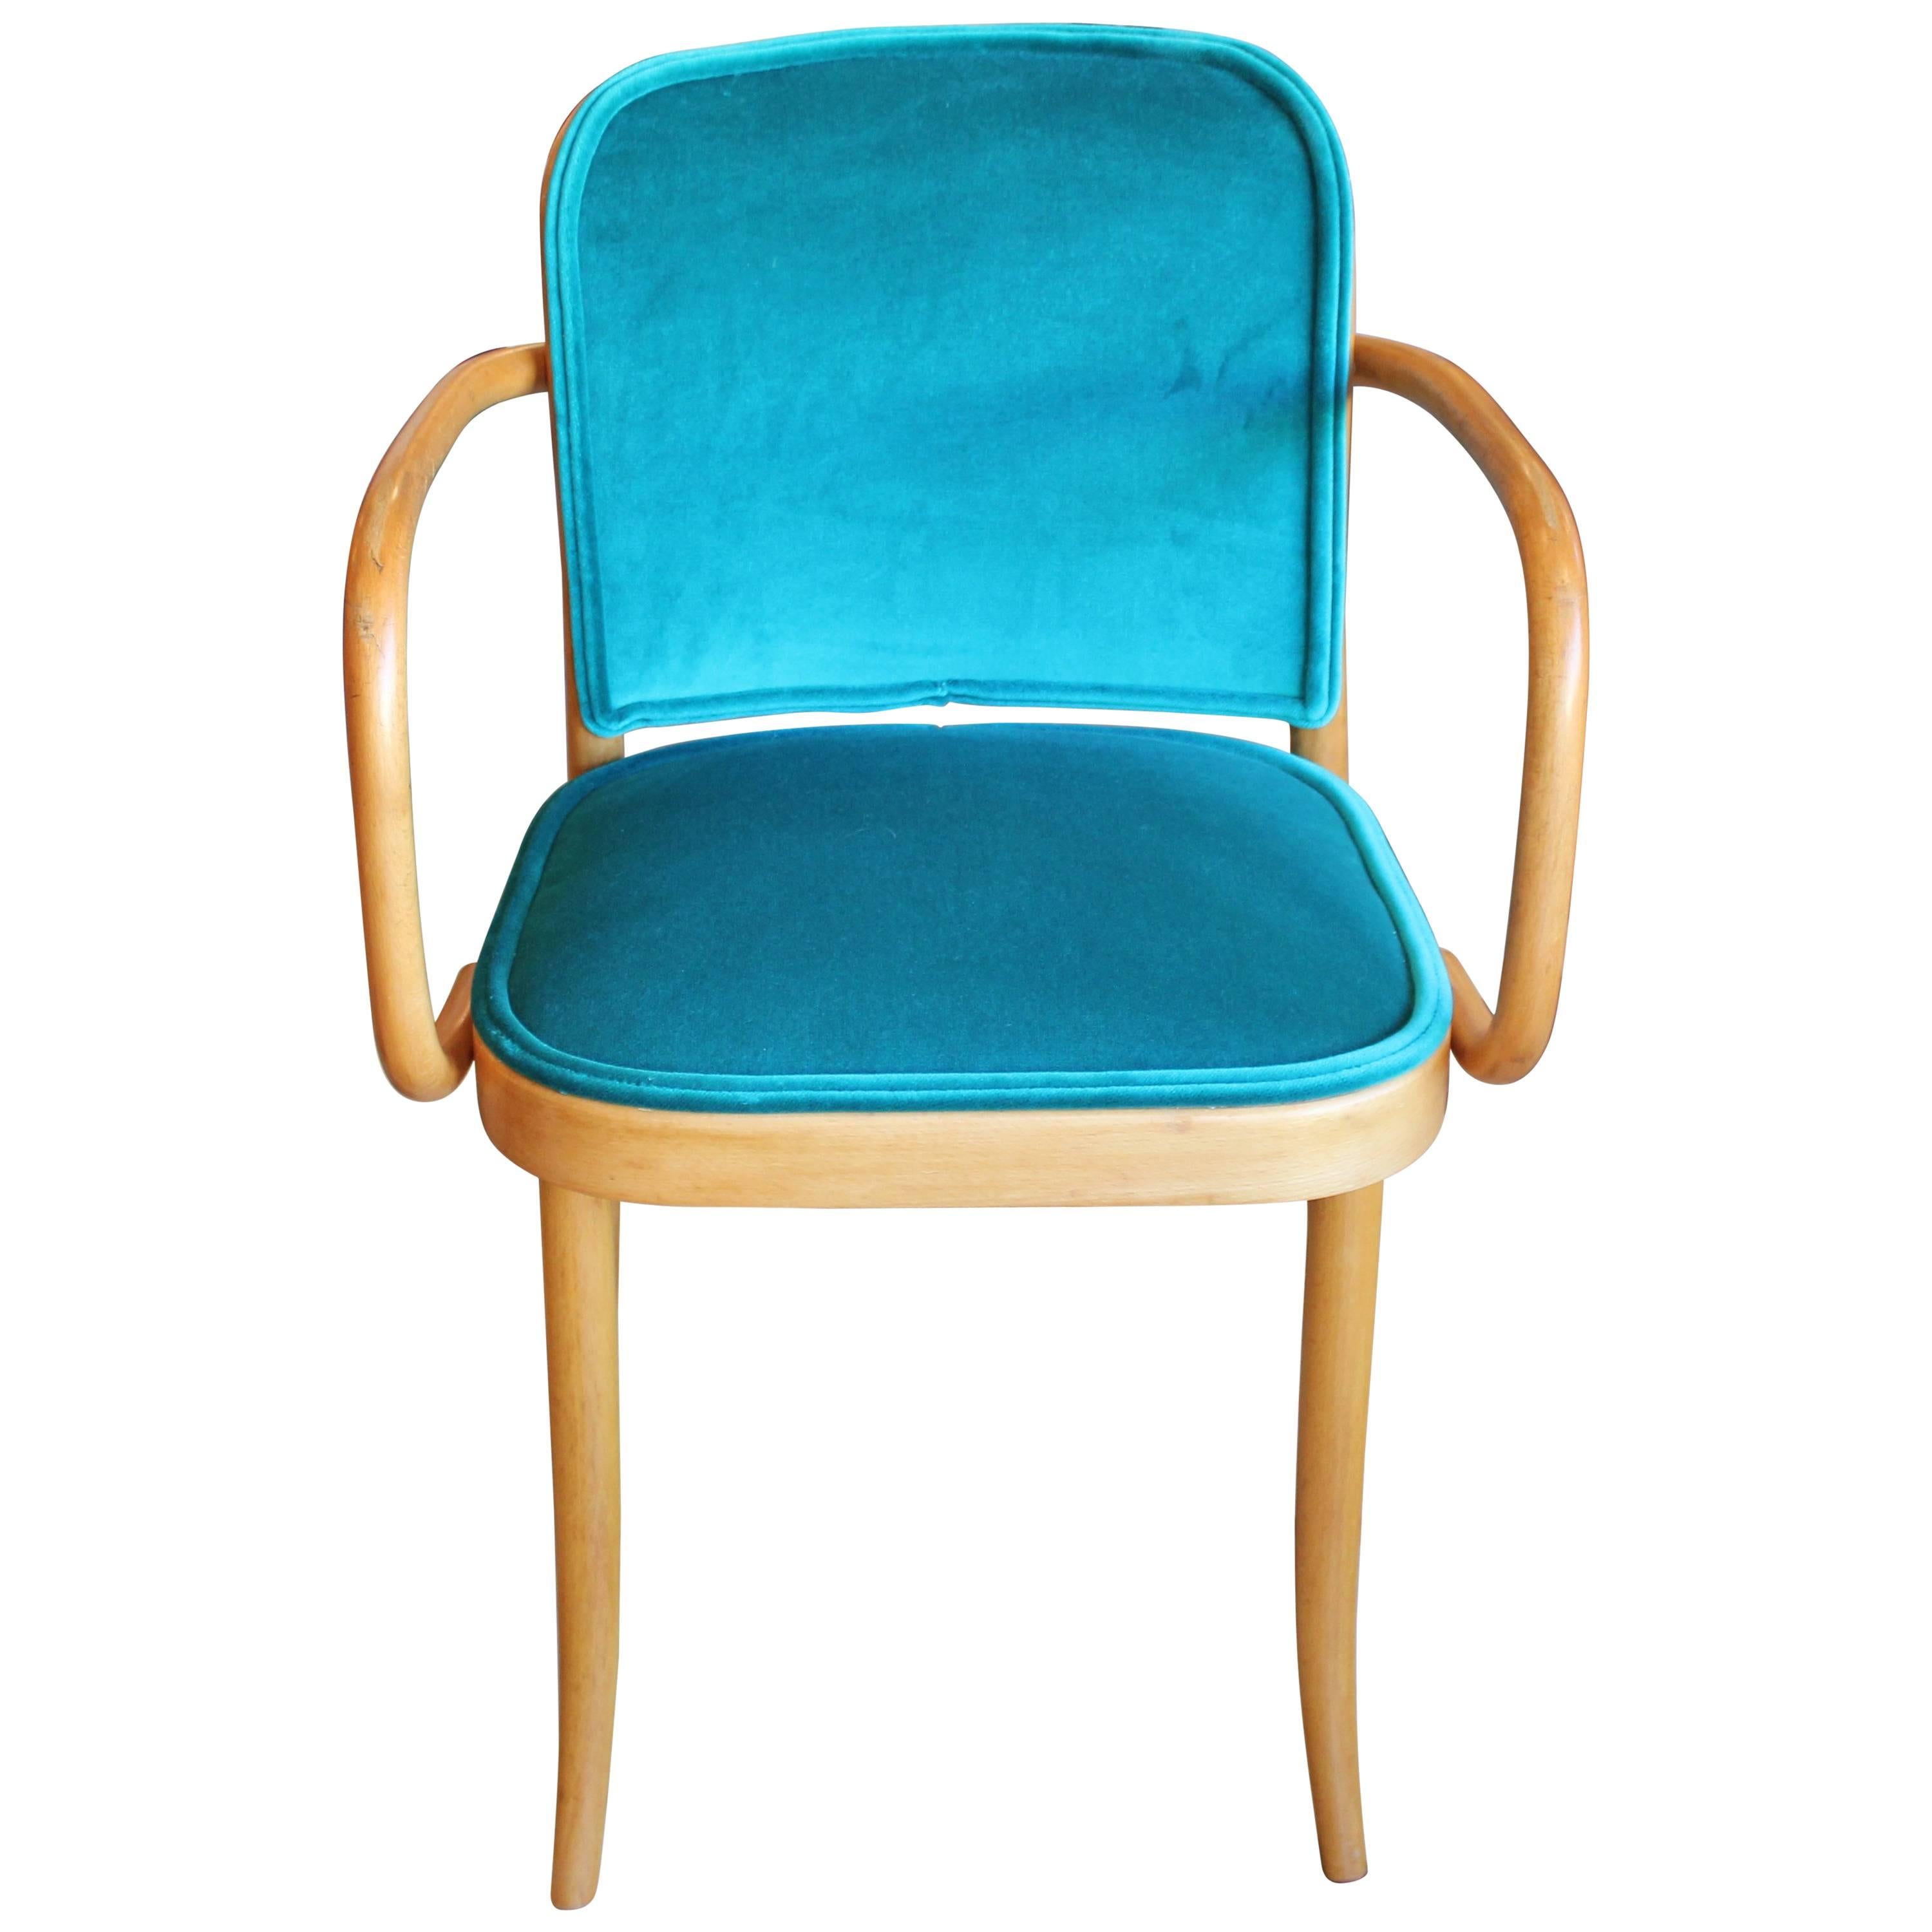 Modern dining chair designed by Josef Hoffmann for Thonet - No 811 . Freshly upholstered in a lush turquoise / teal velvet. The frame is in great vintage condition. A perfect addition to any room looking for a splash of color. 